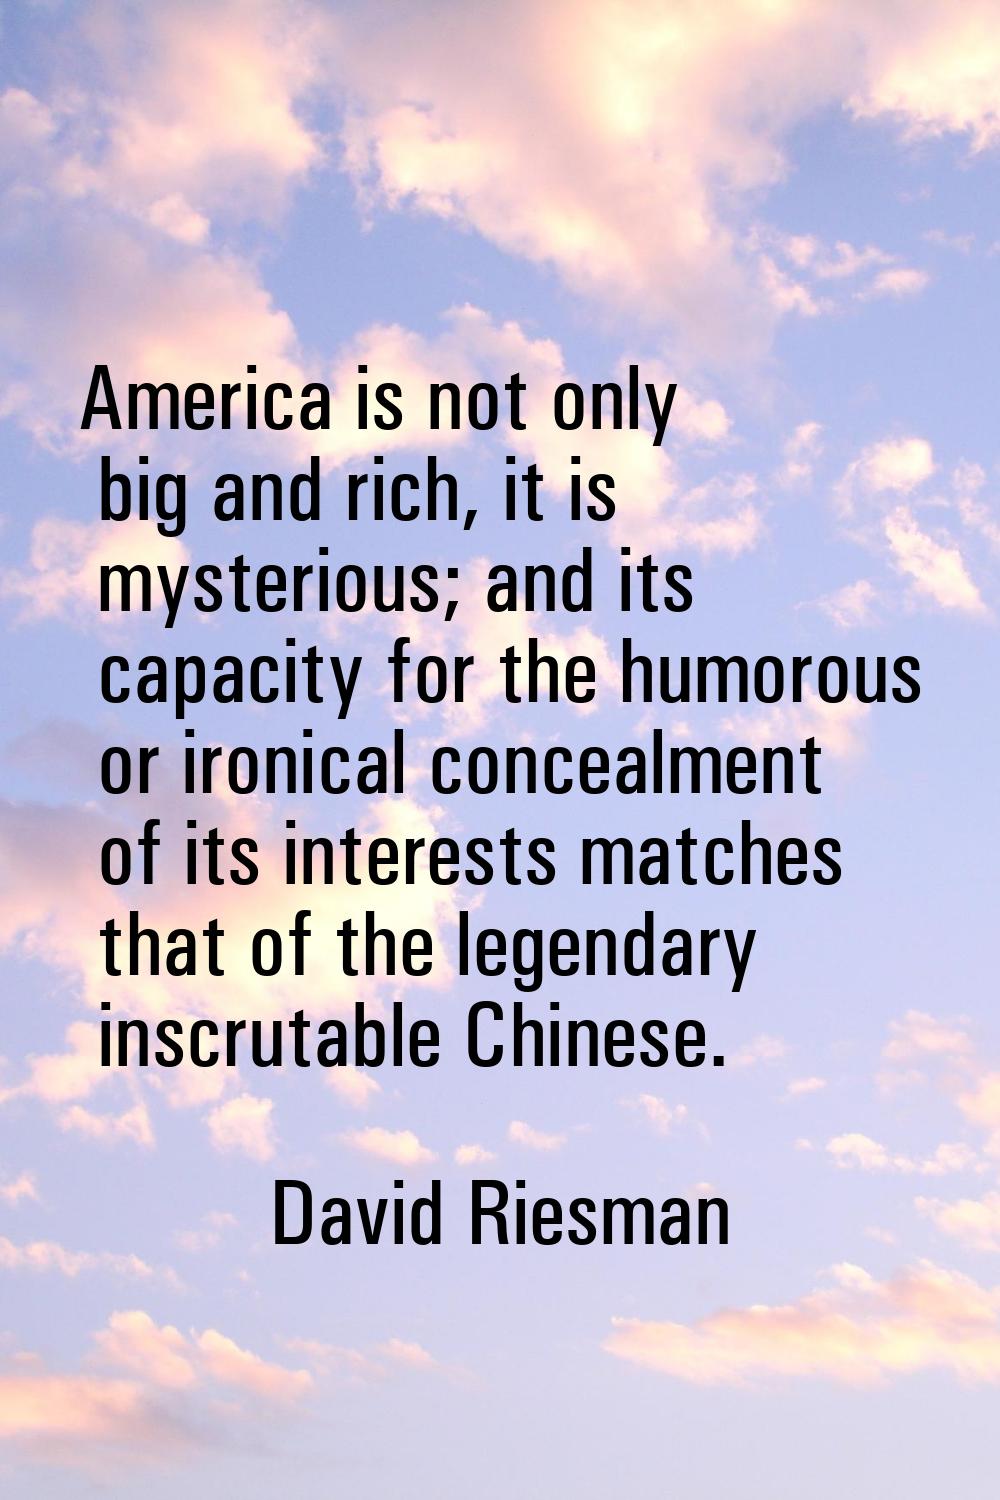 America is not only big and rich, it is mysterious; and its capacity for the humorous or ironical c